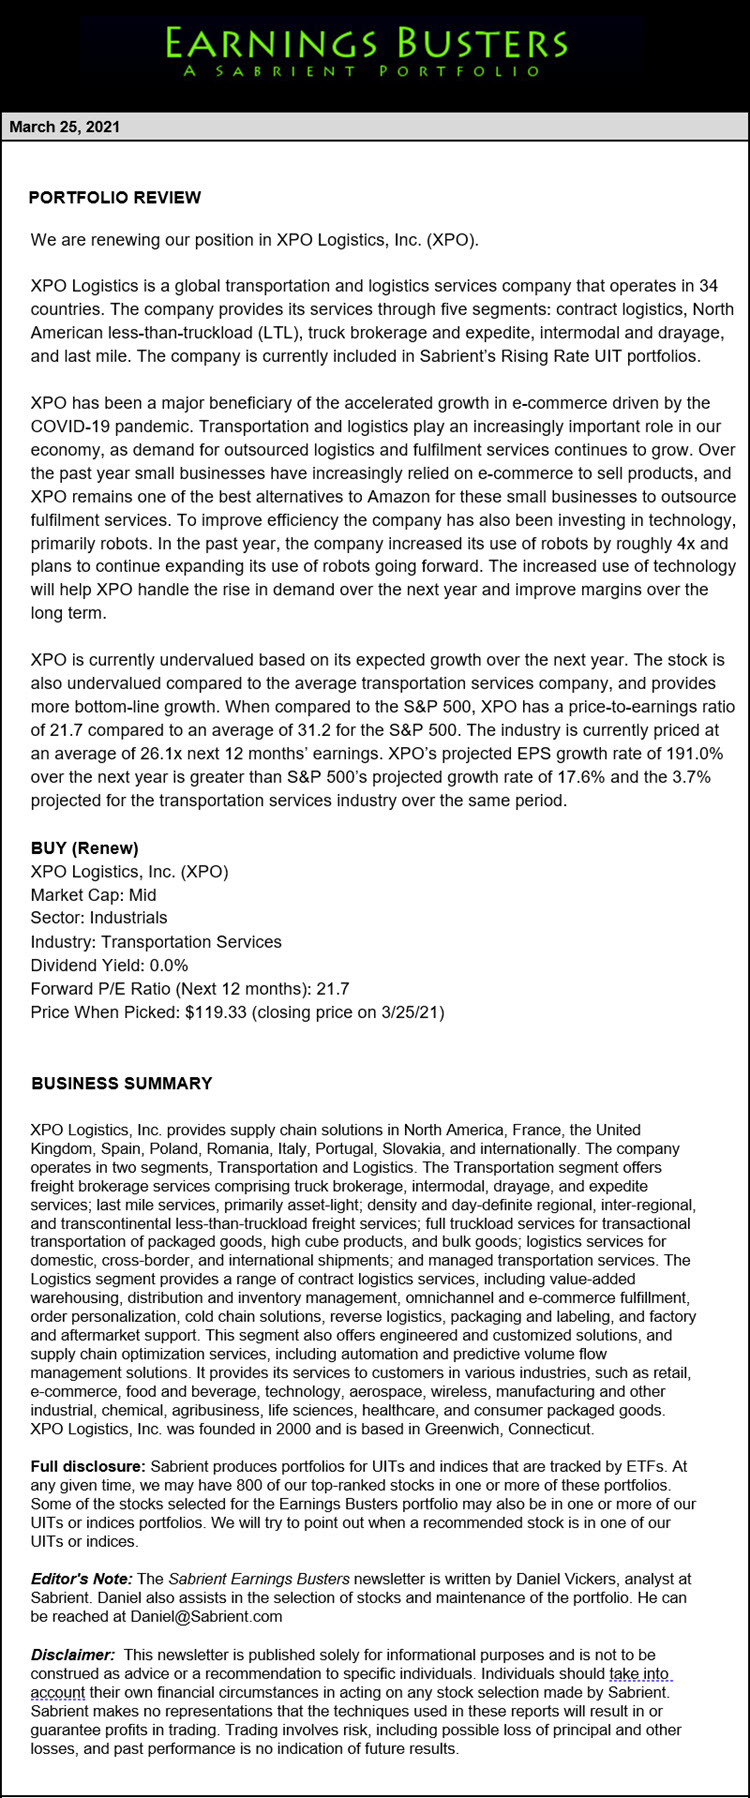 Earnings Busters Newsletter - March 25, 2021